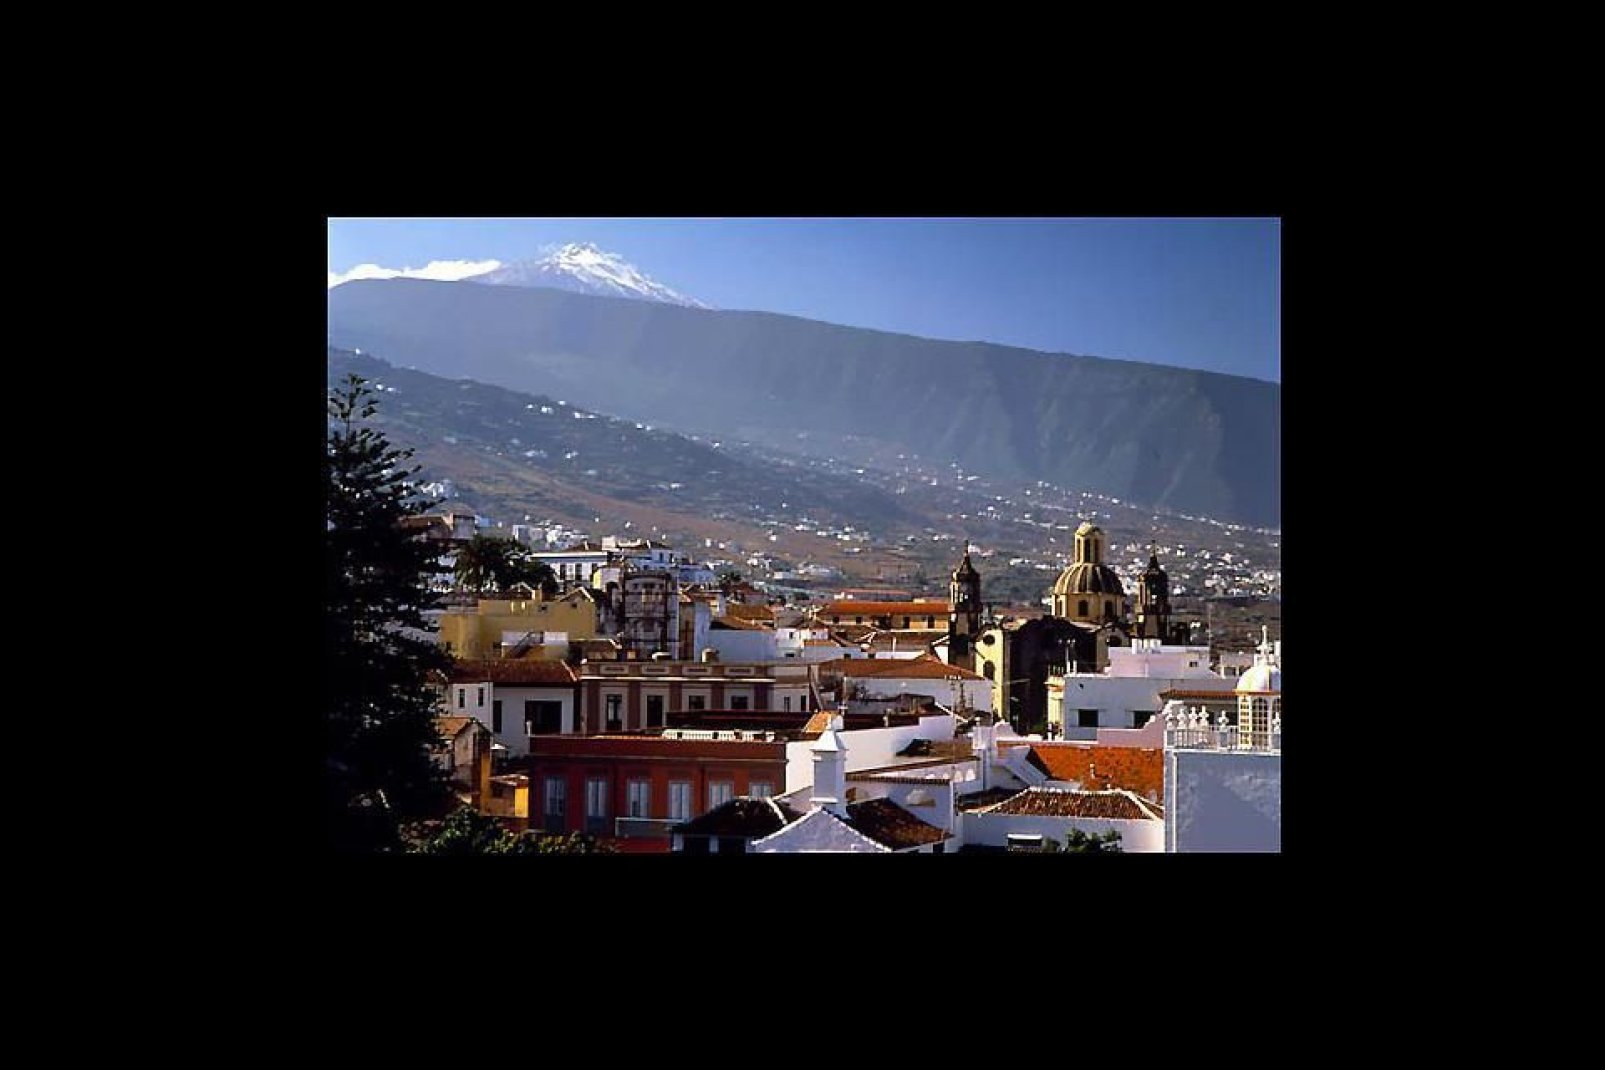 The town of La Orotava is located in a fertile valley of the same name. Once the capital of the land of the Guanches (native inhabitants of the Canary Islands).